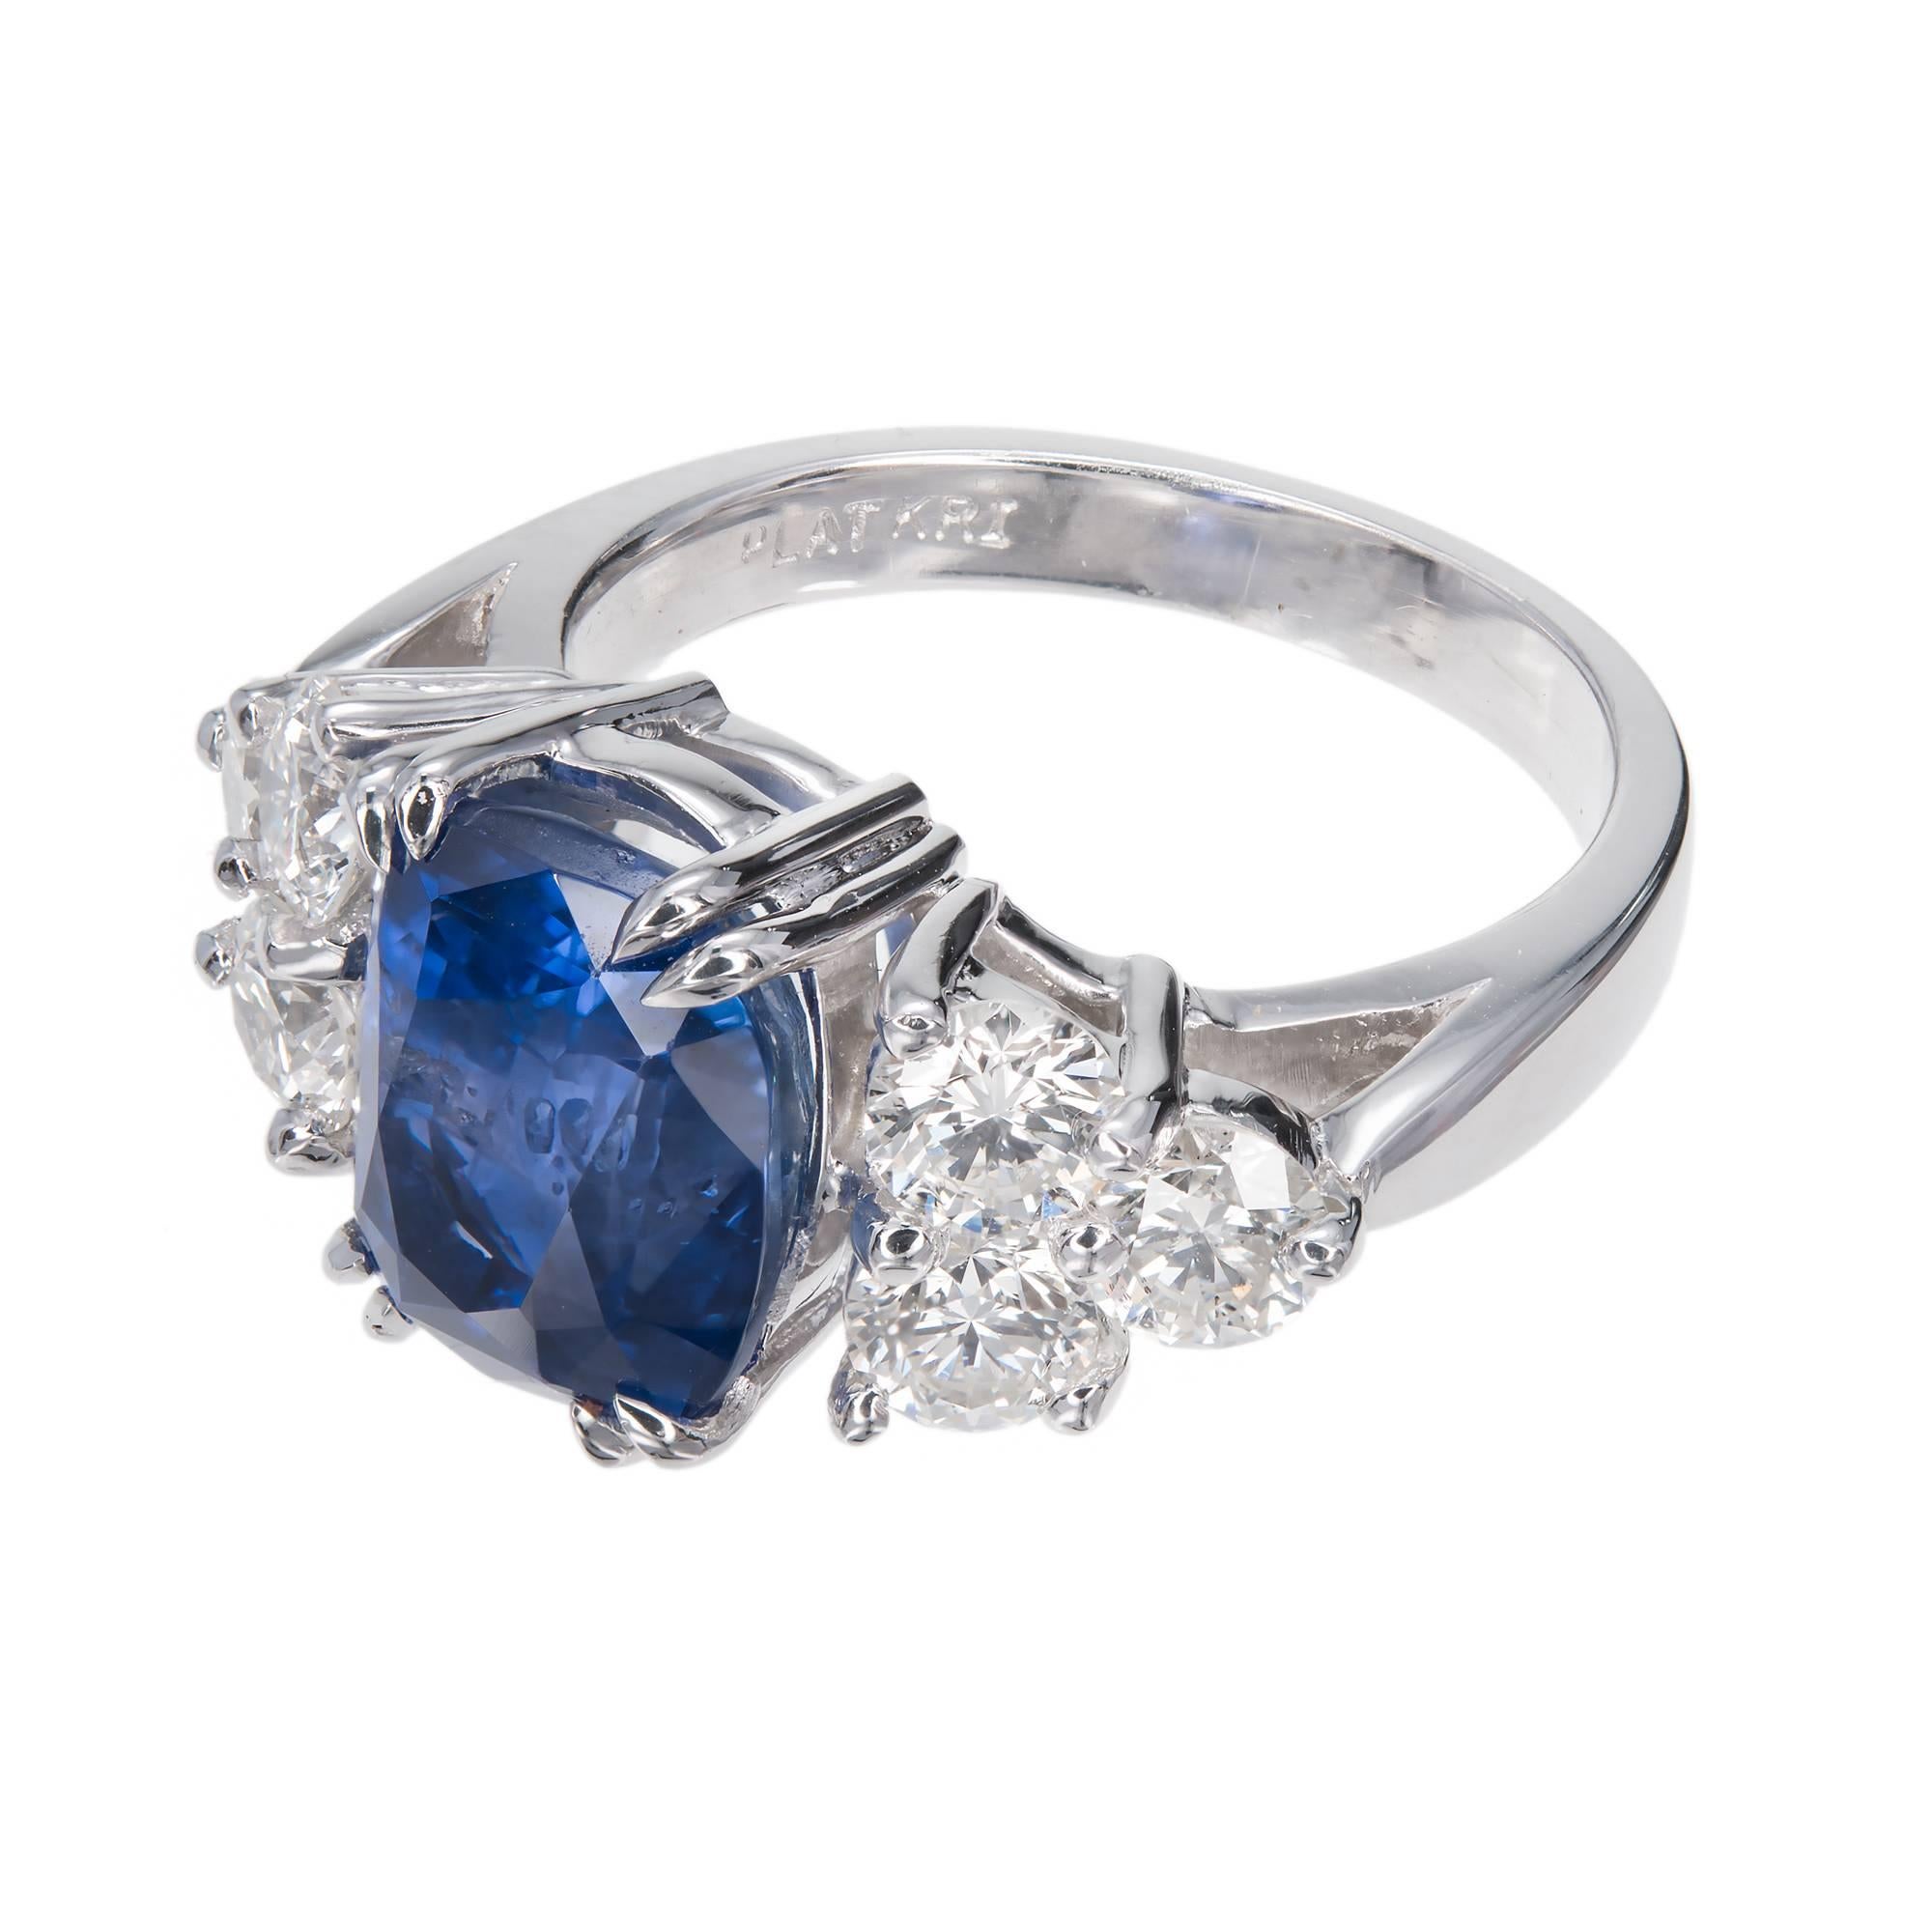 Antique cushion cut sapphire and diamond engagement ring.  GIA certified no heat sapphire center stone with 6 round accent diamonds, in a handmade platinum setting from the Peter Suchy Workshop. 

1 cushion blue Sapphire, approx. total weight